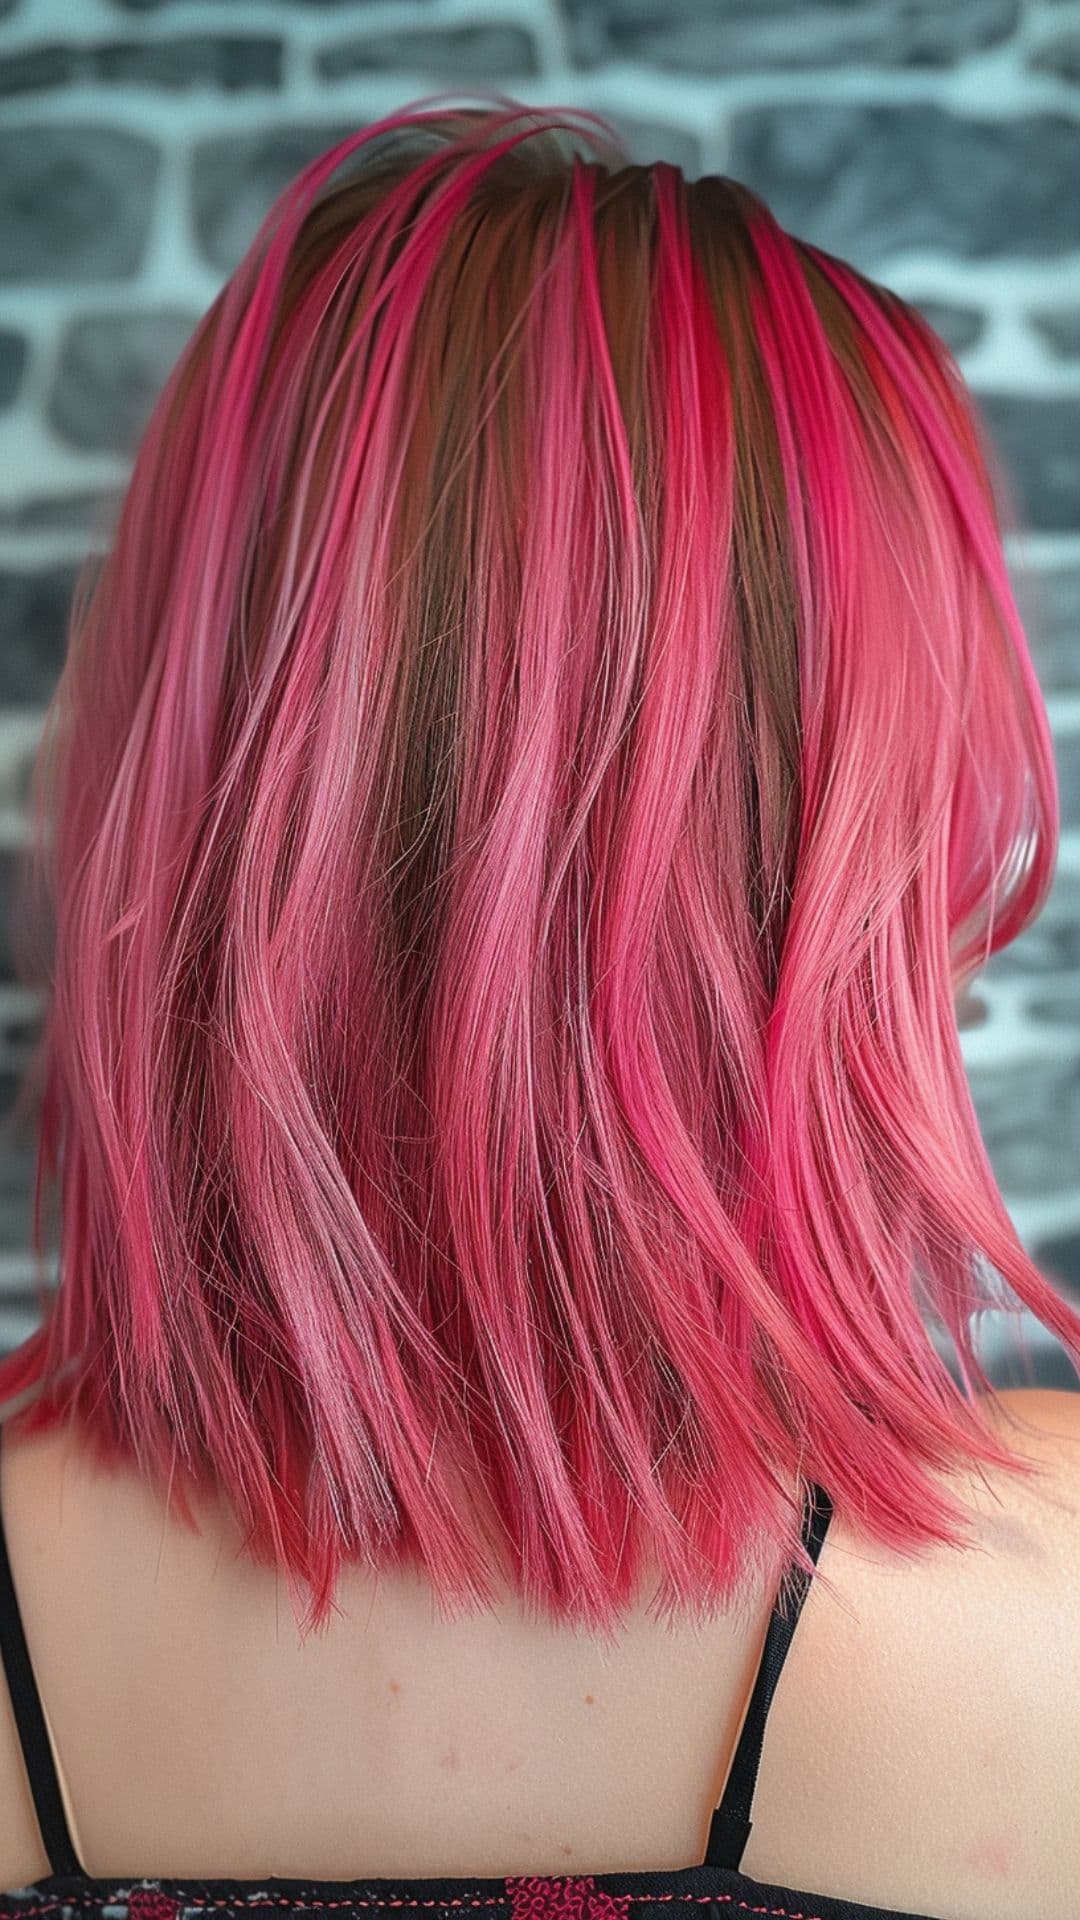 A woman modelling a raspberry pink highlights.